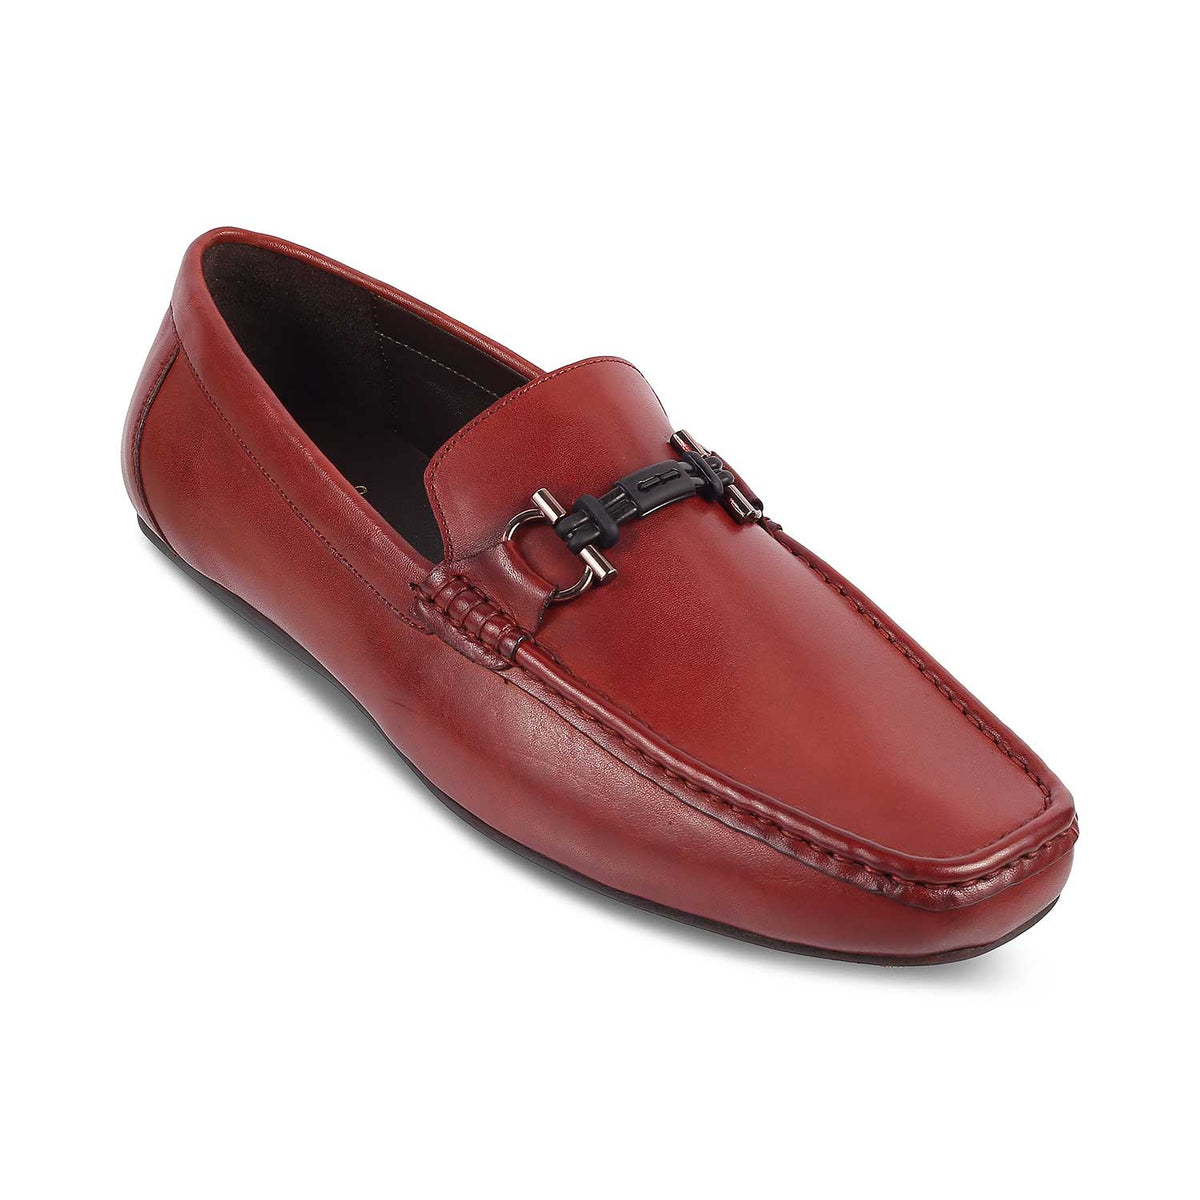 The Proter Wine Men's Leather Driving Loafers Tresmode